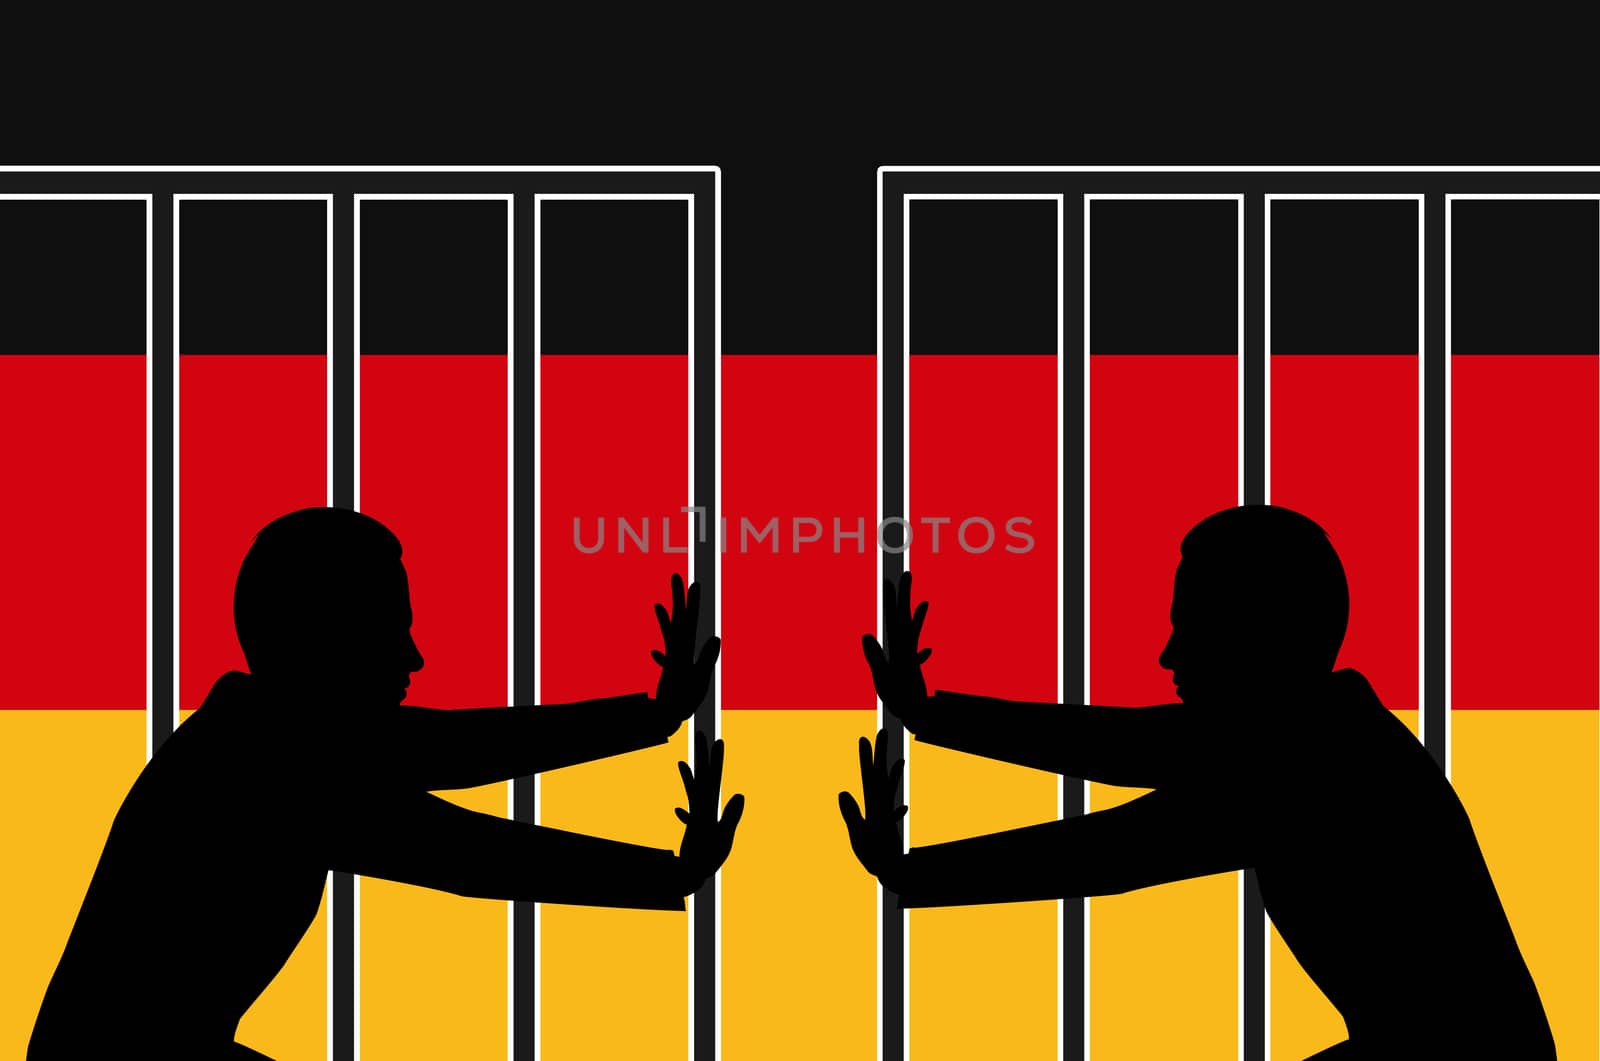 German Government ends the open door policy to refugees